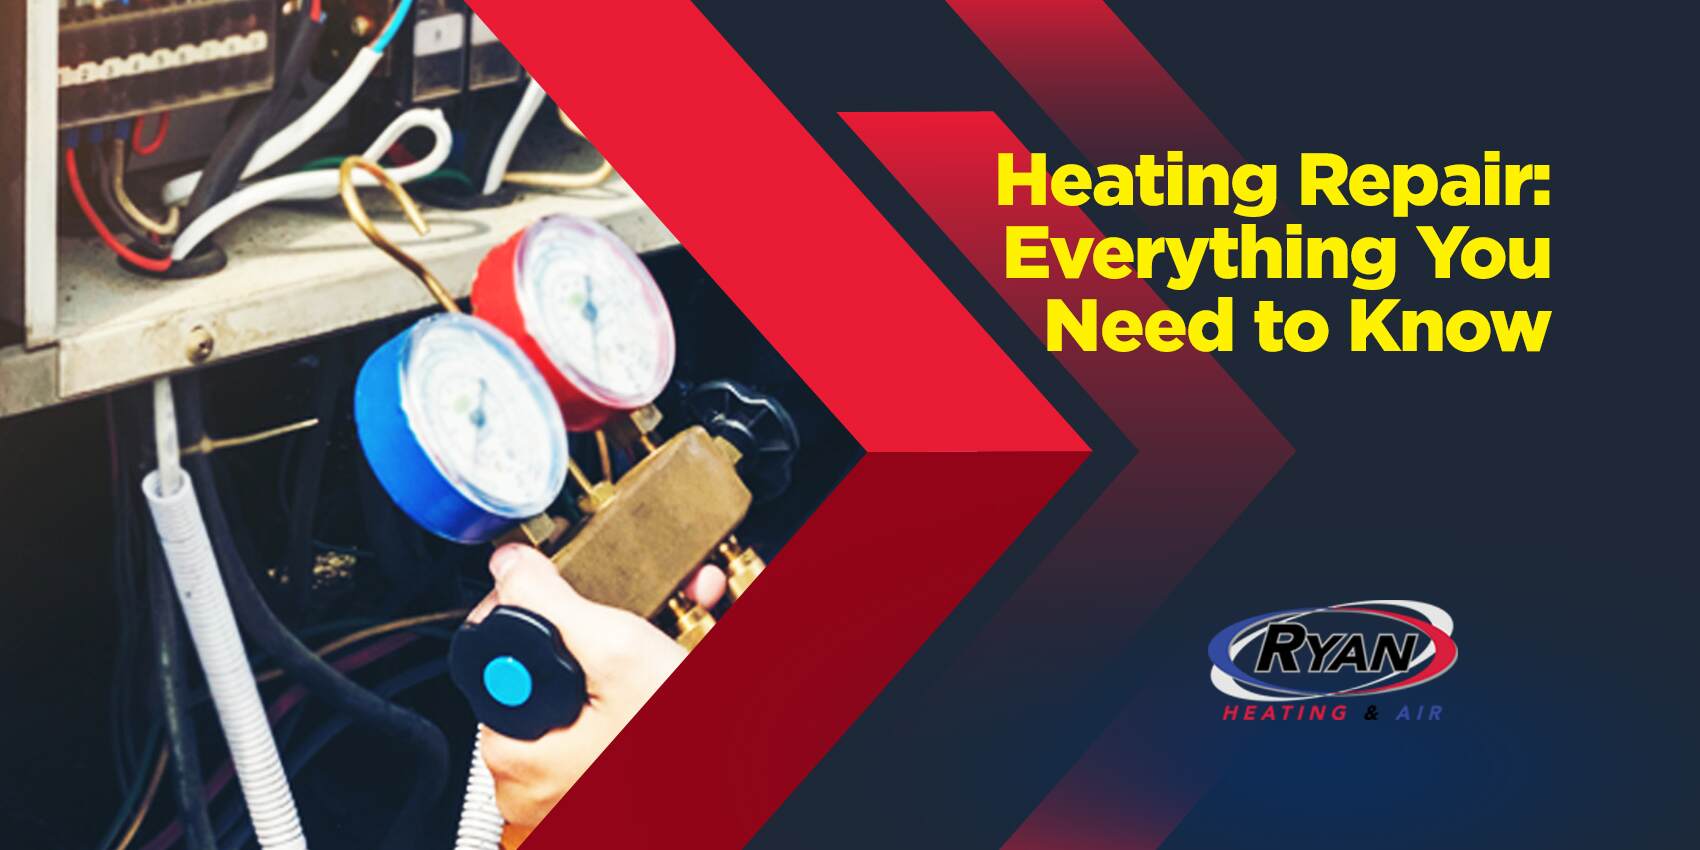 Heating Repair: Everything You Need to Know with tools image